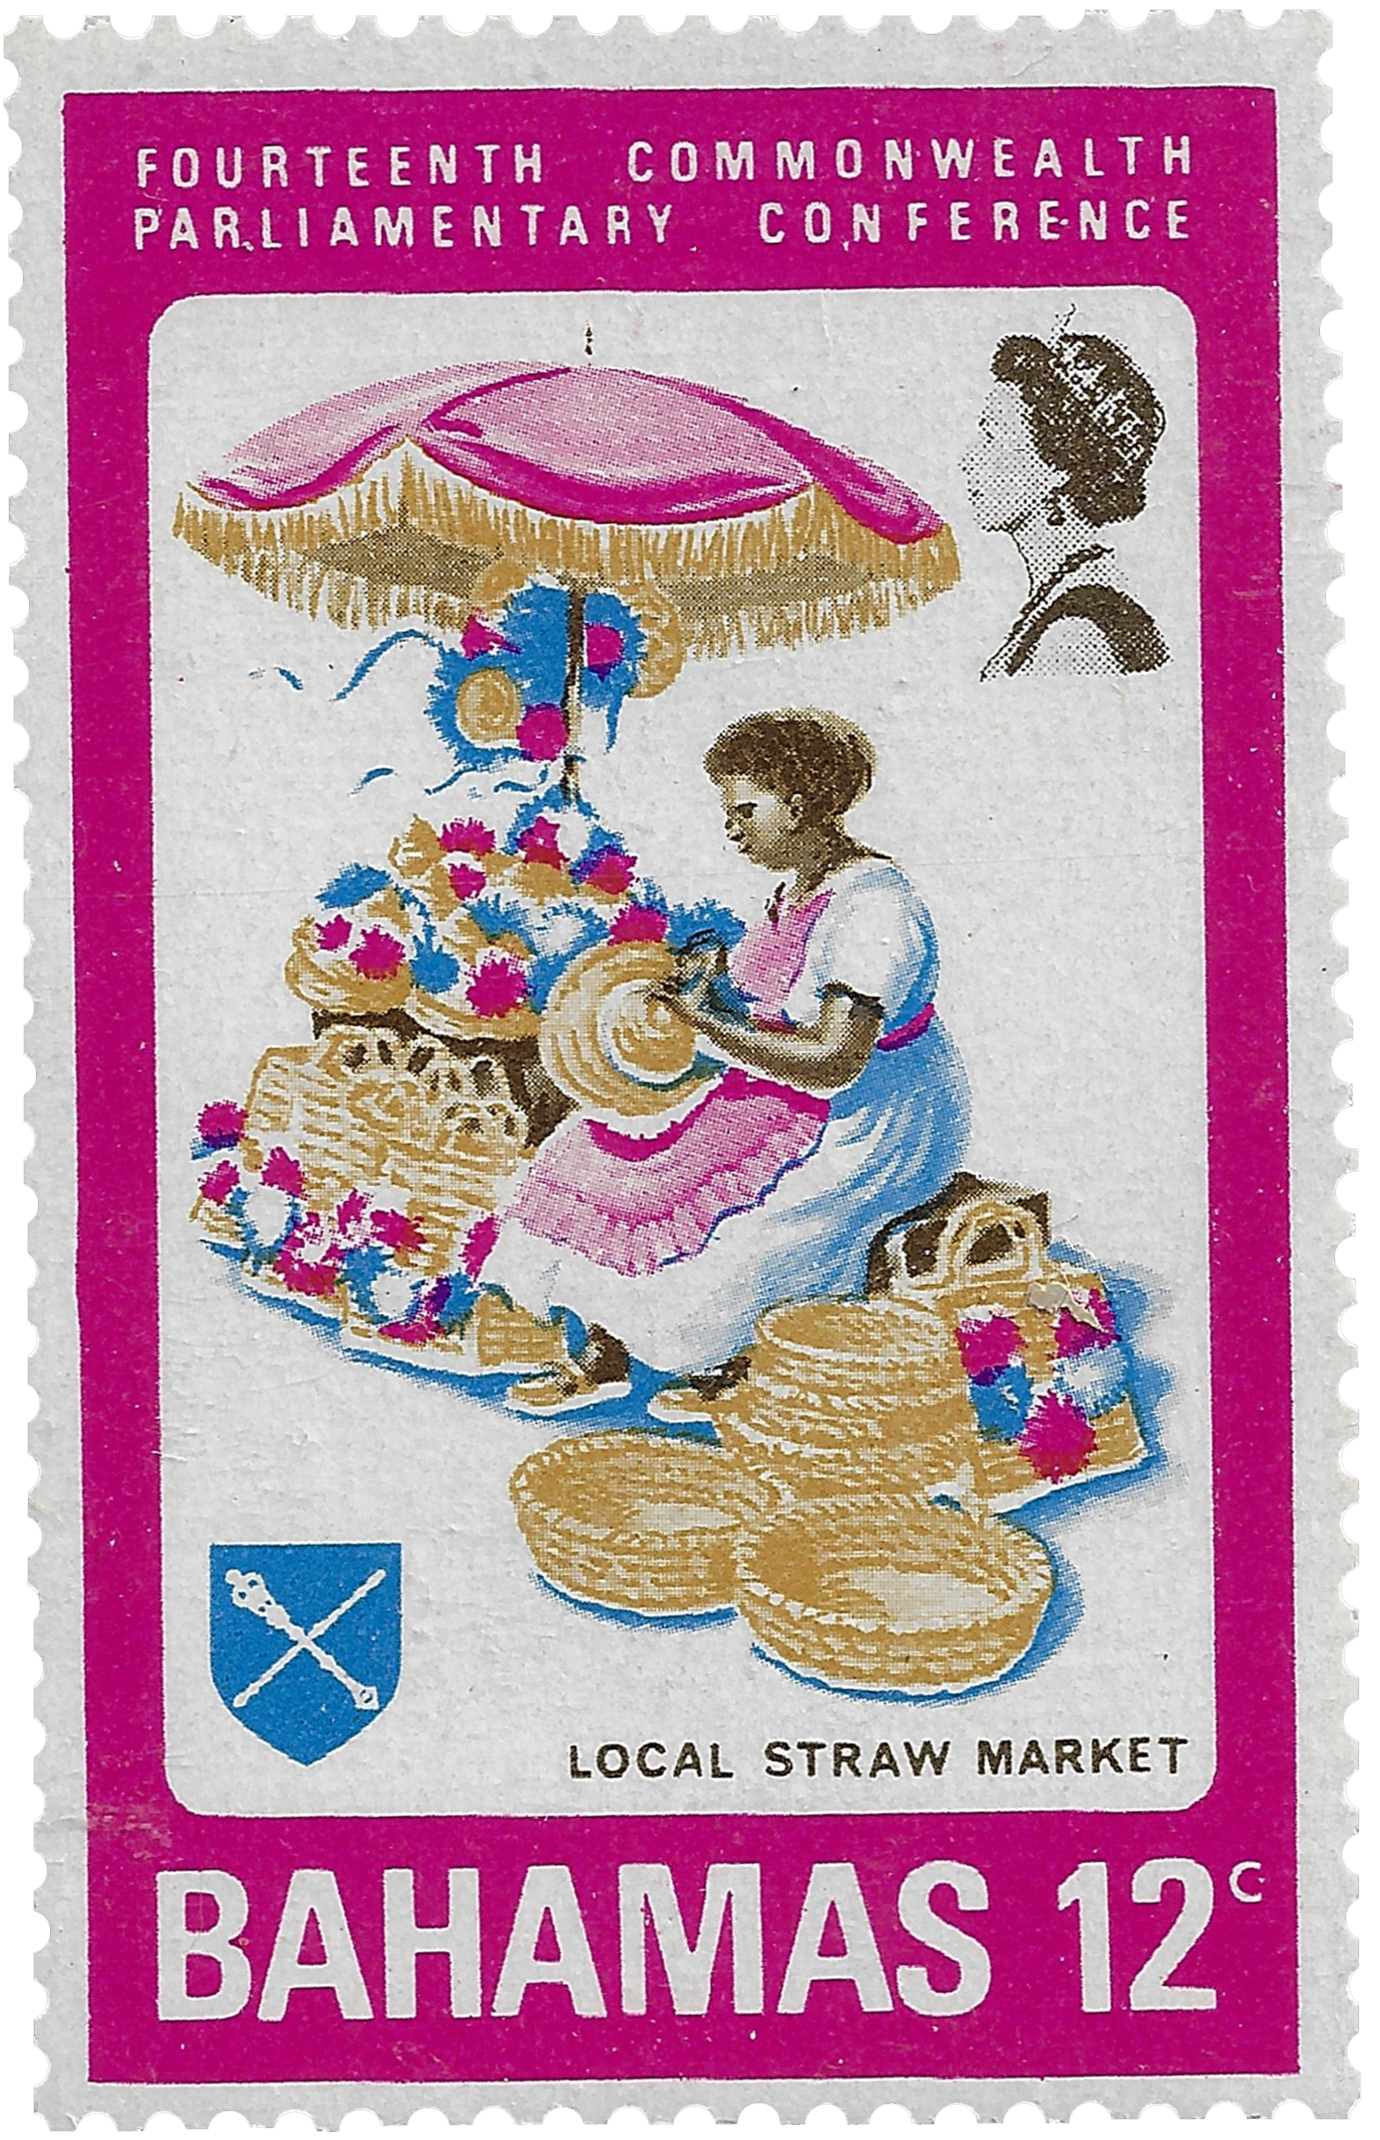 12c 1968, Fourteenth Commonwealth Parliamentary Conference, Local Straw Market